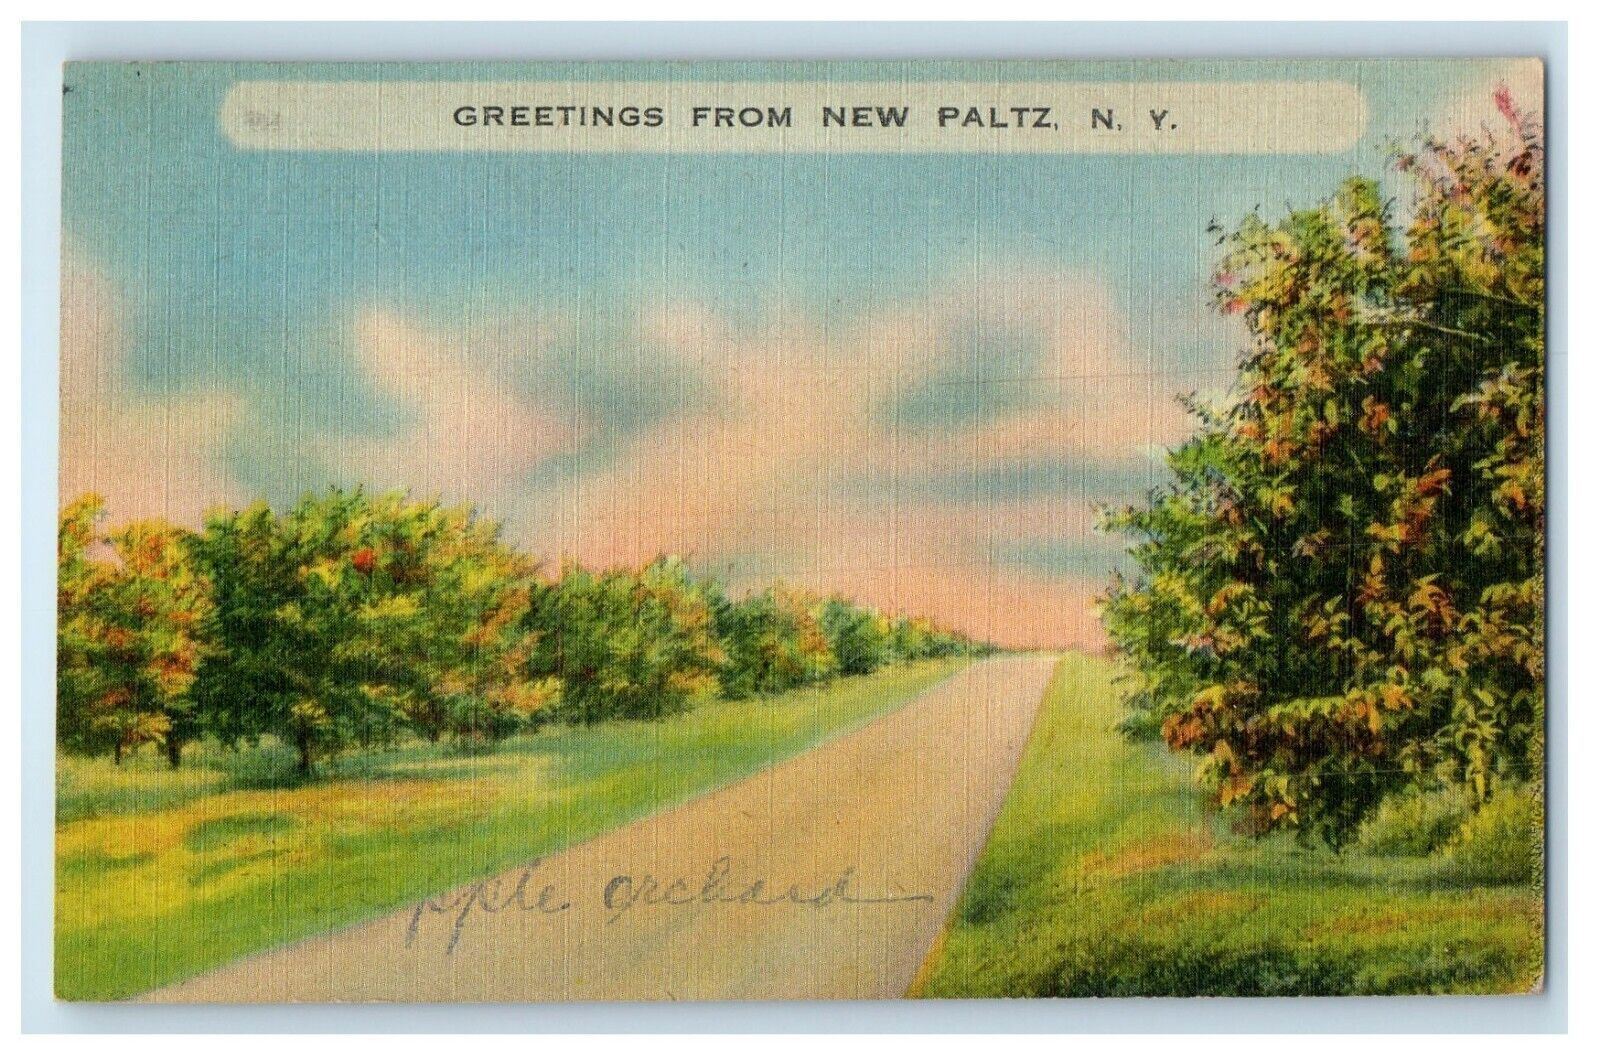 1943 Greetings From New Paltz New York NY, Road View Posted Vintage Postcard